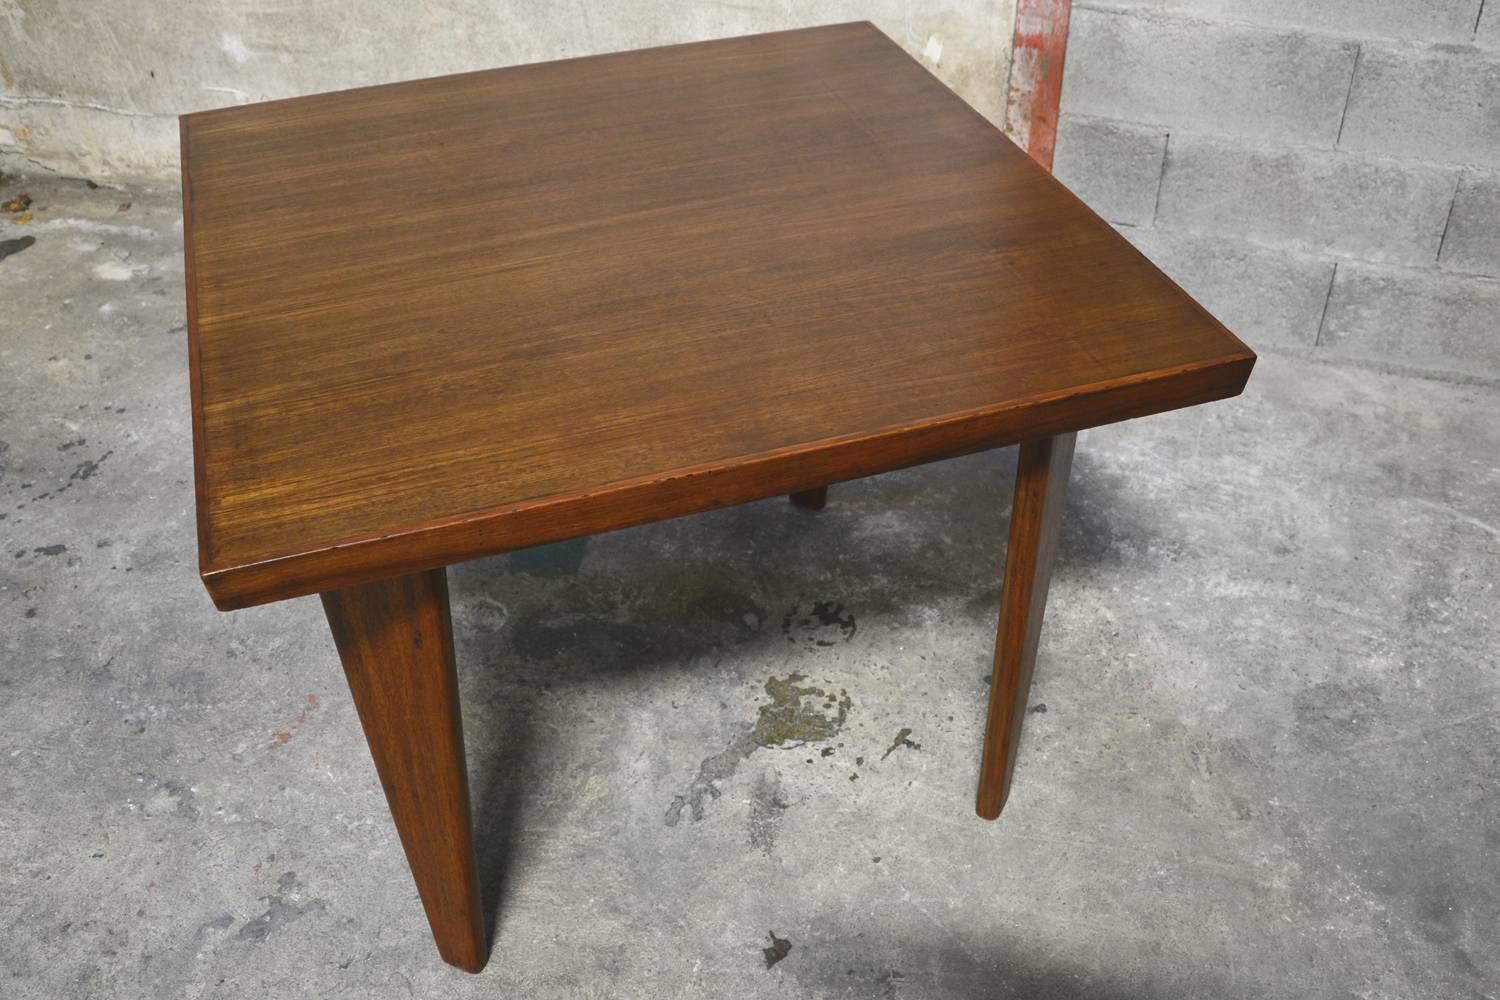 Indian Pierre Jeanneret, Square Table for the Administration Building in Chandigarh For Sale